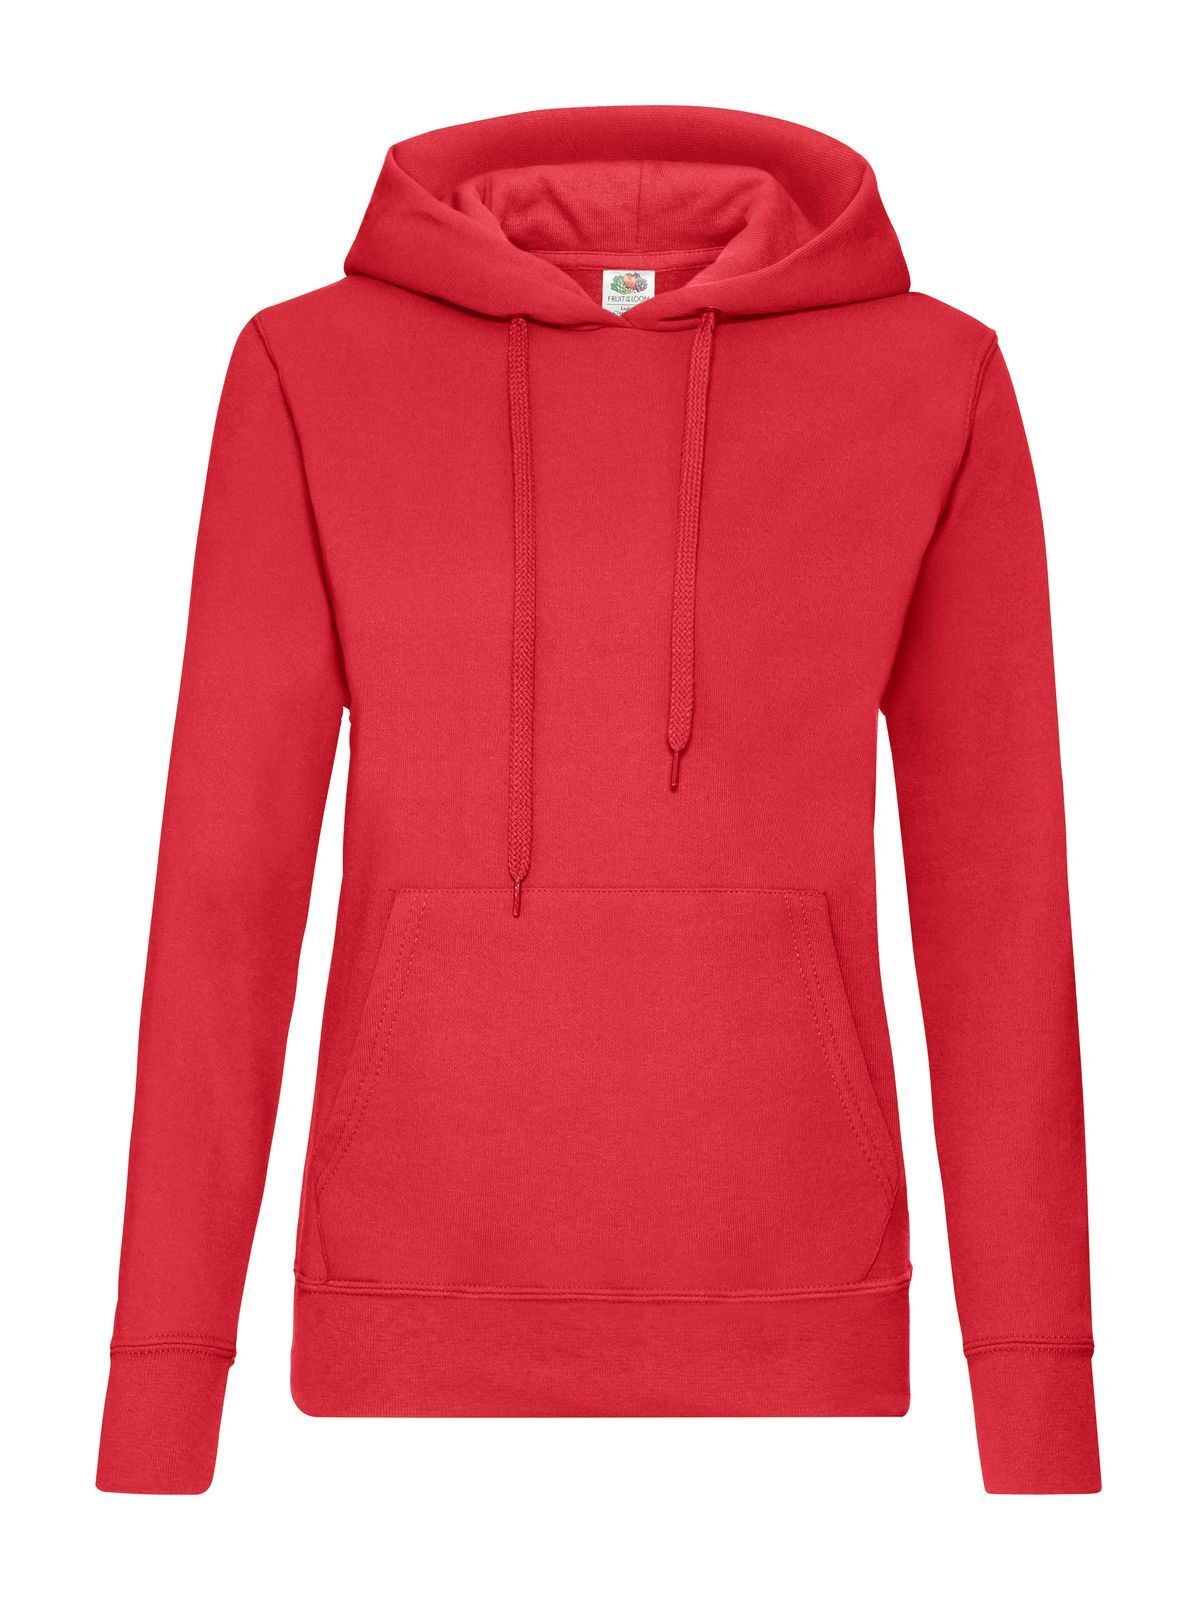 Pittogramma Ladies Classic Hooded Sweat - FR620380 red